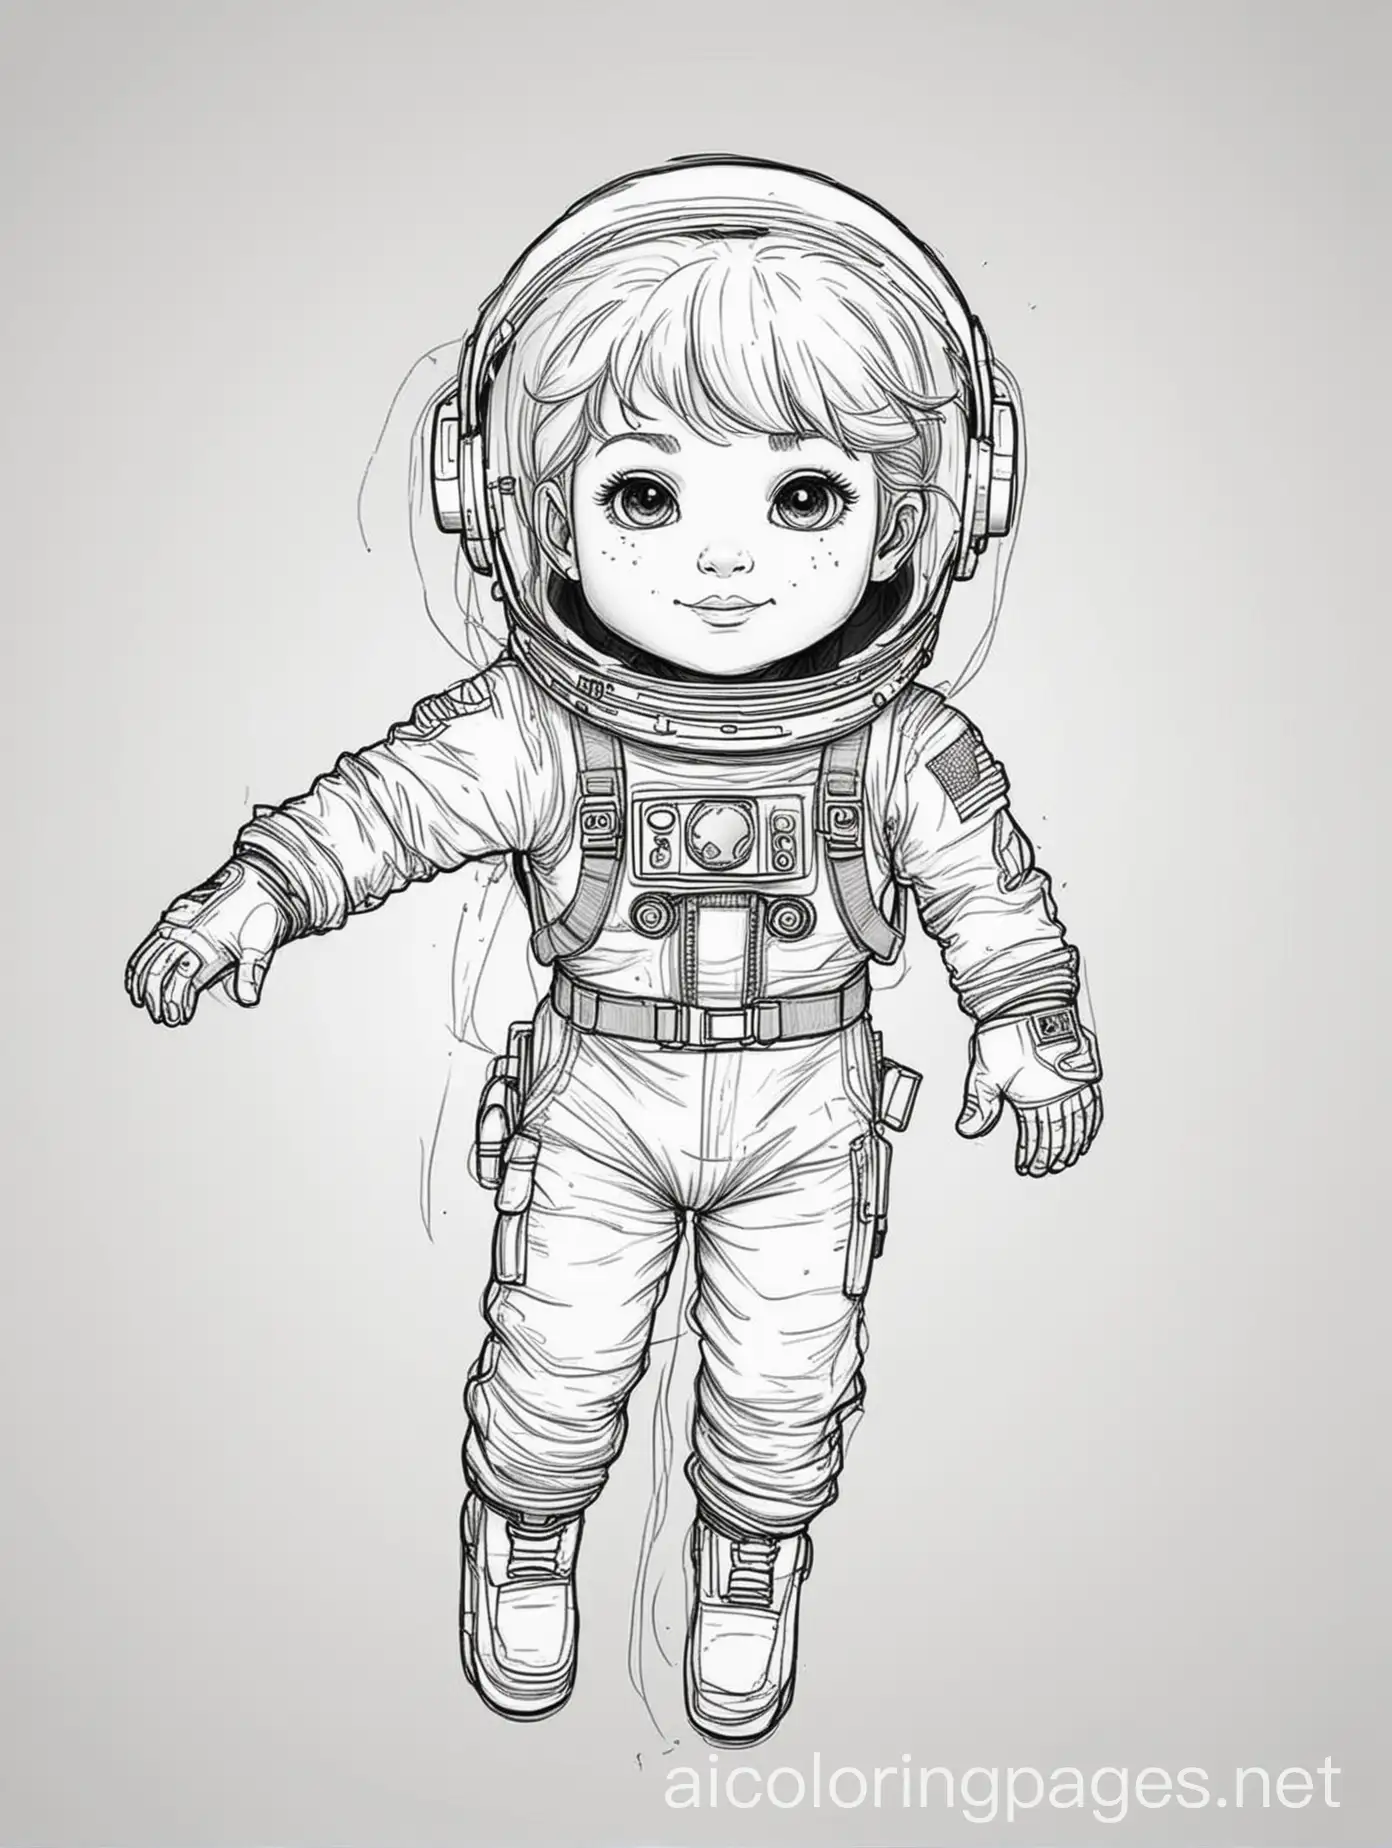 Child-Astronauts-Floating-in-Zero-Gravity-Coloring-Page-Line-Art